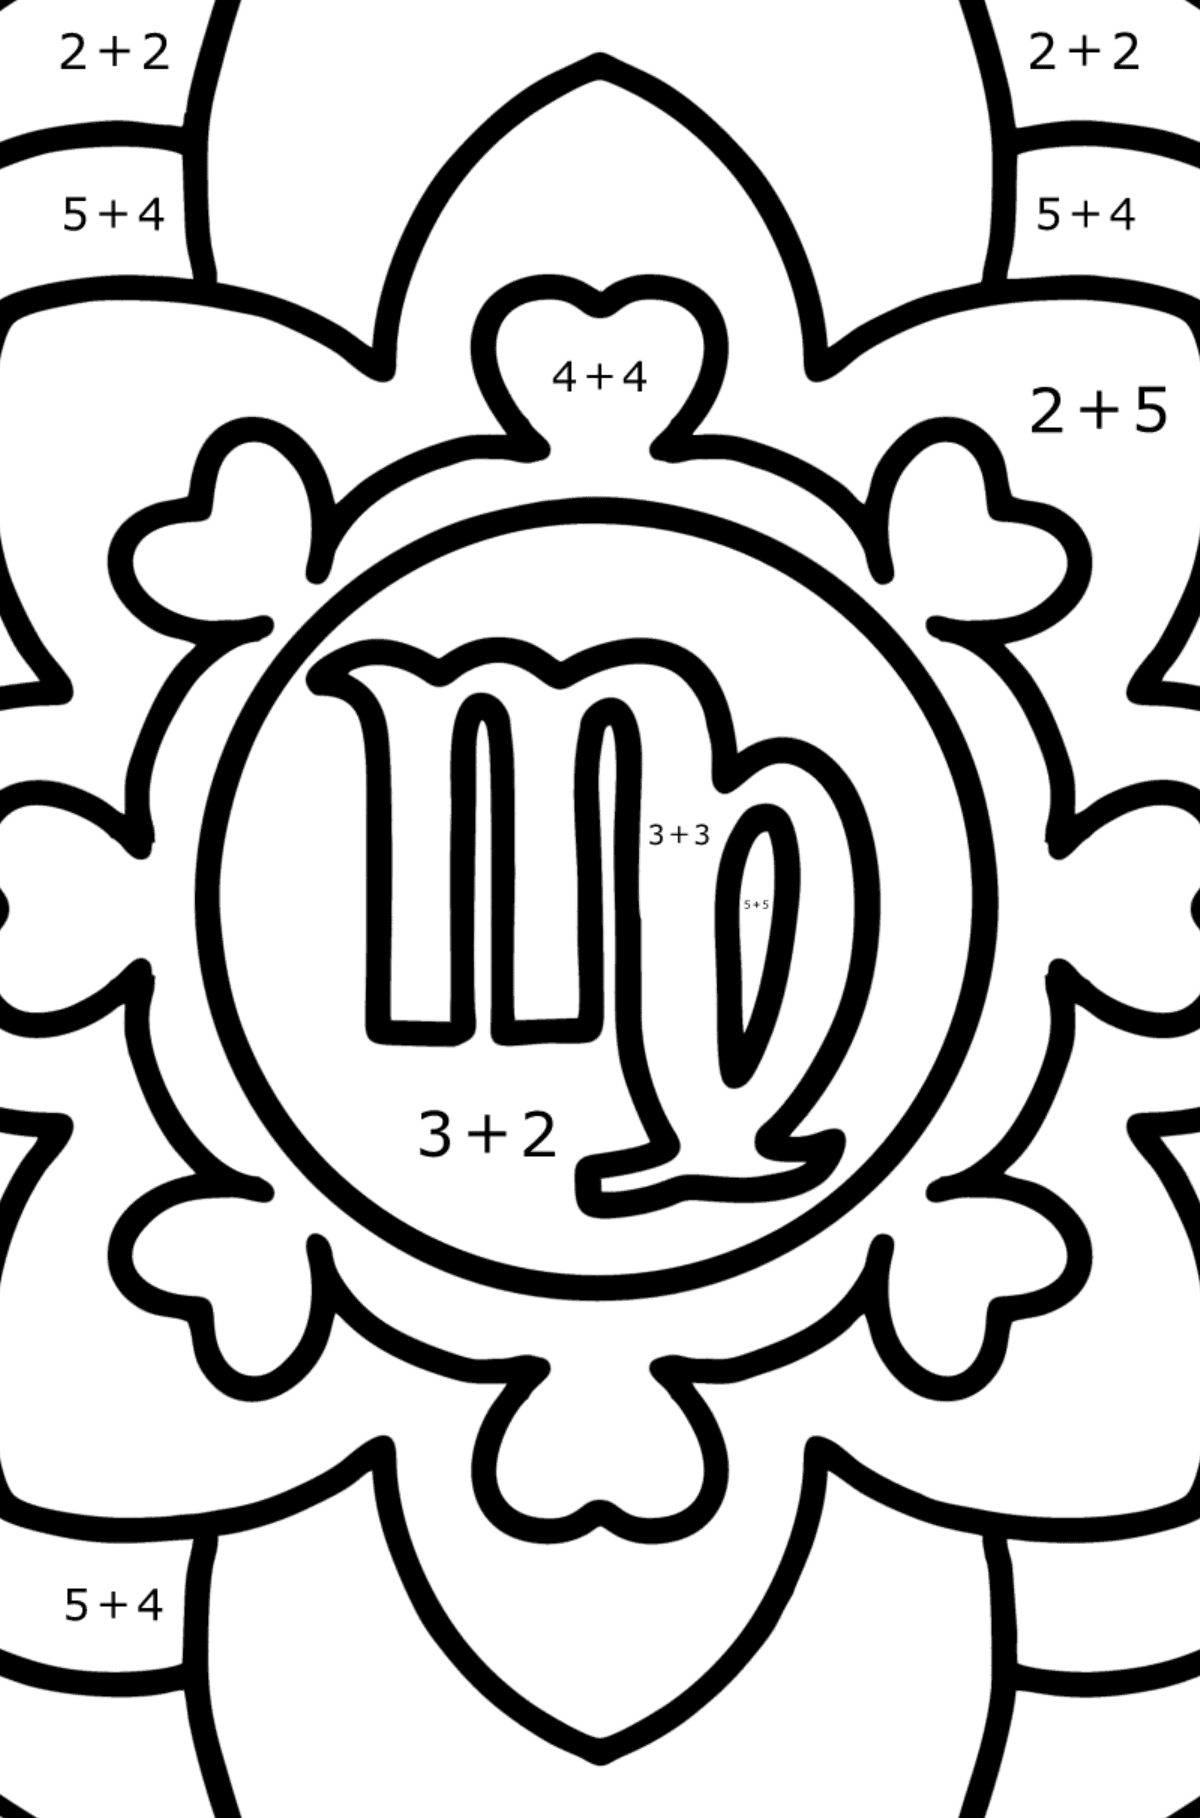 Coloring page - zodiac sign Virgo - Math Coloring - Addition for Kids